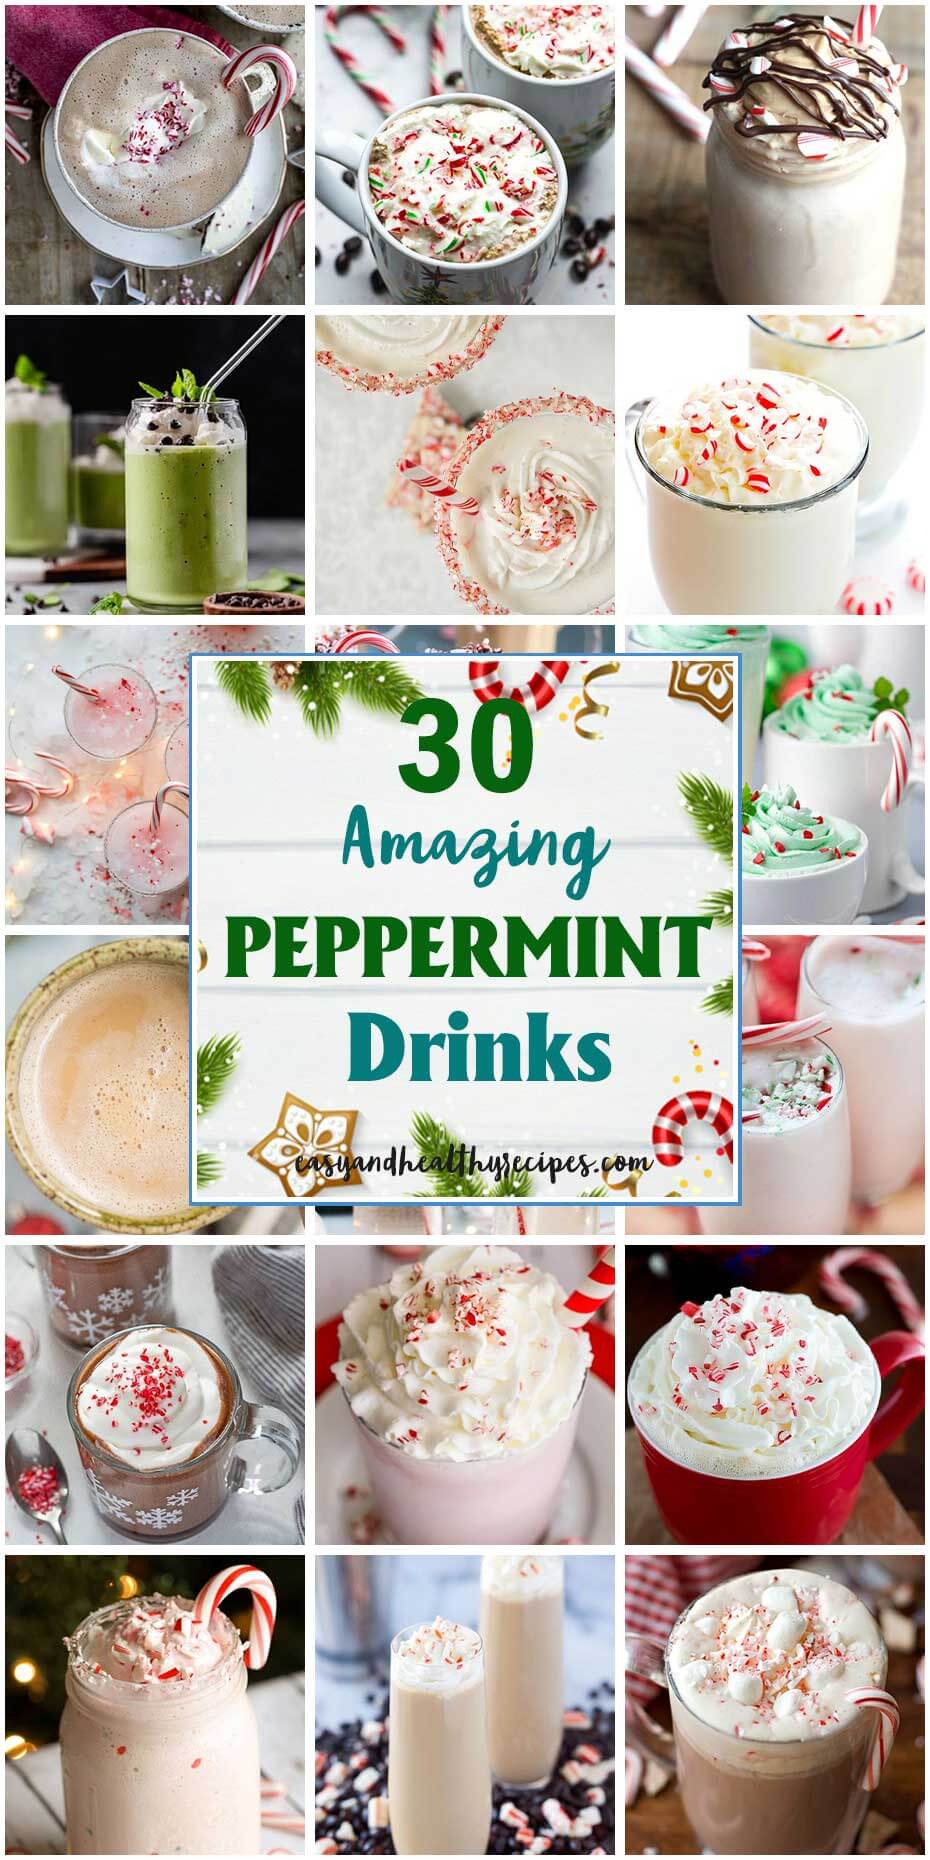 30 Peppermint Drinks To Keep You Amazed